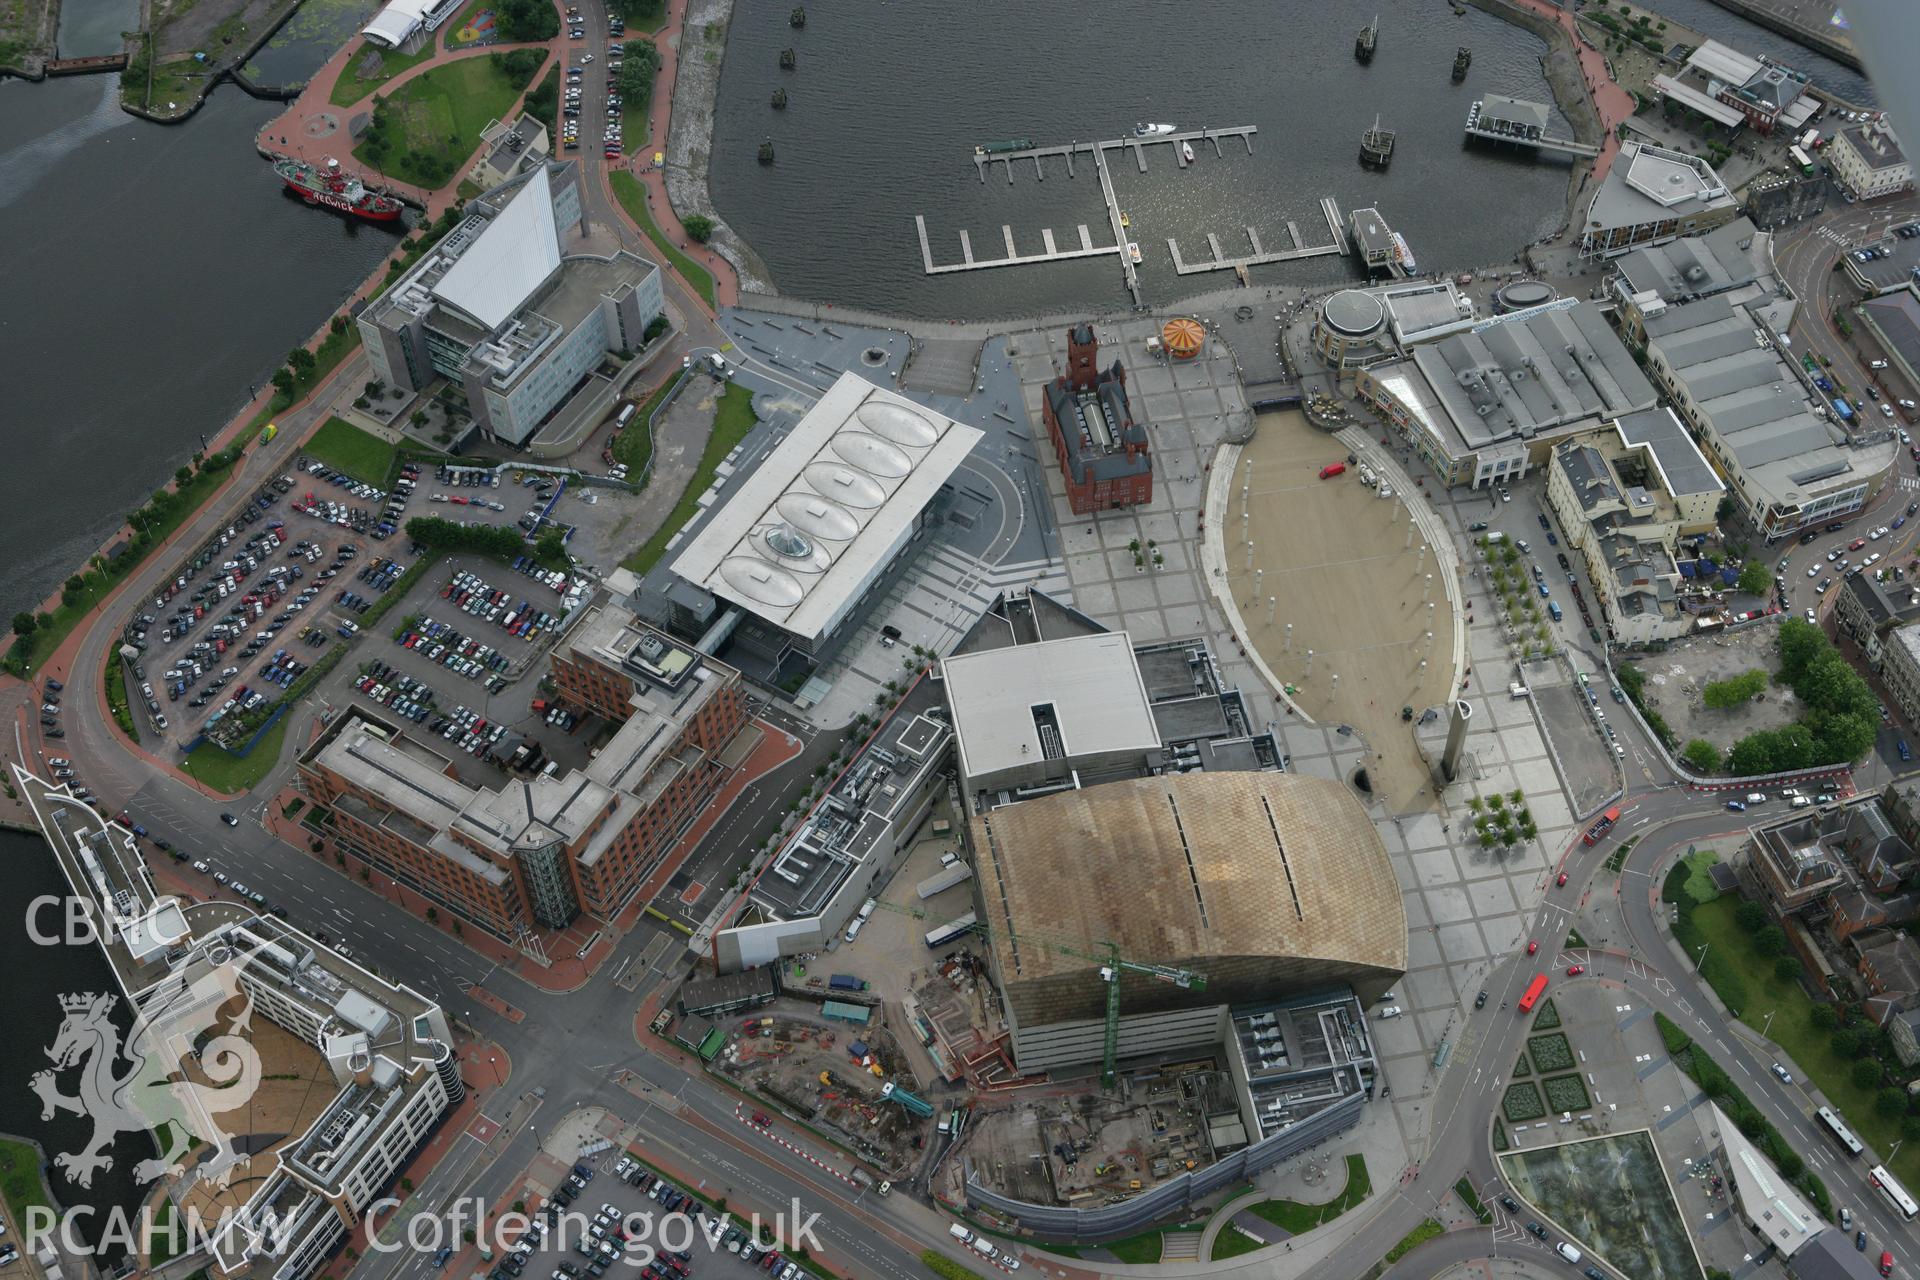 RCAHMW colour oblique aerial photograph of the 'Senedd' Building and Cardiff Bay. Taken on 30 July 2007 by Toby Driver